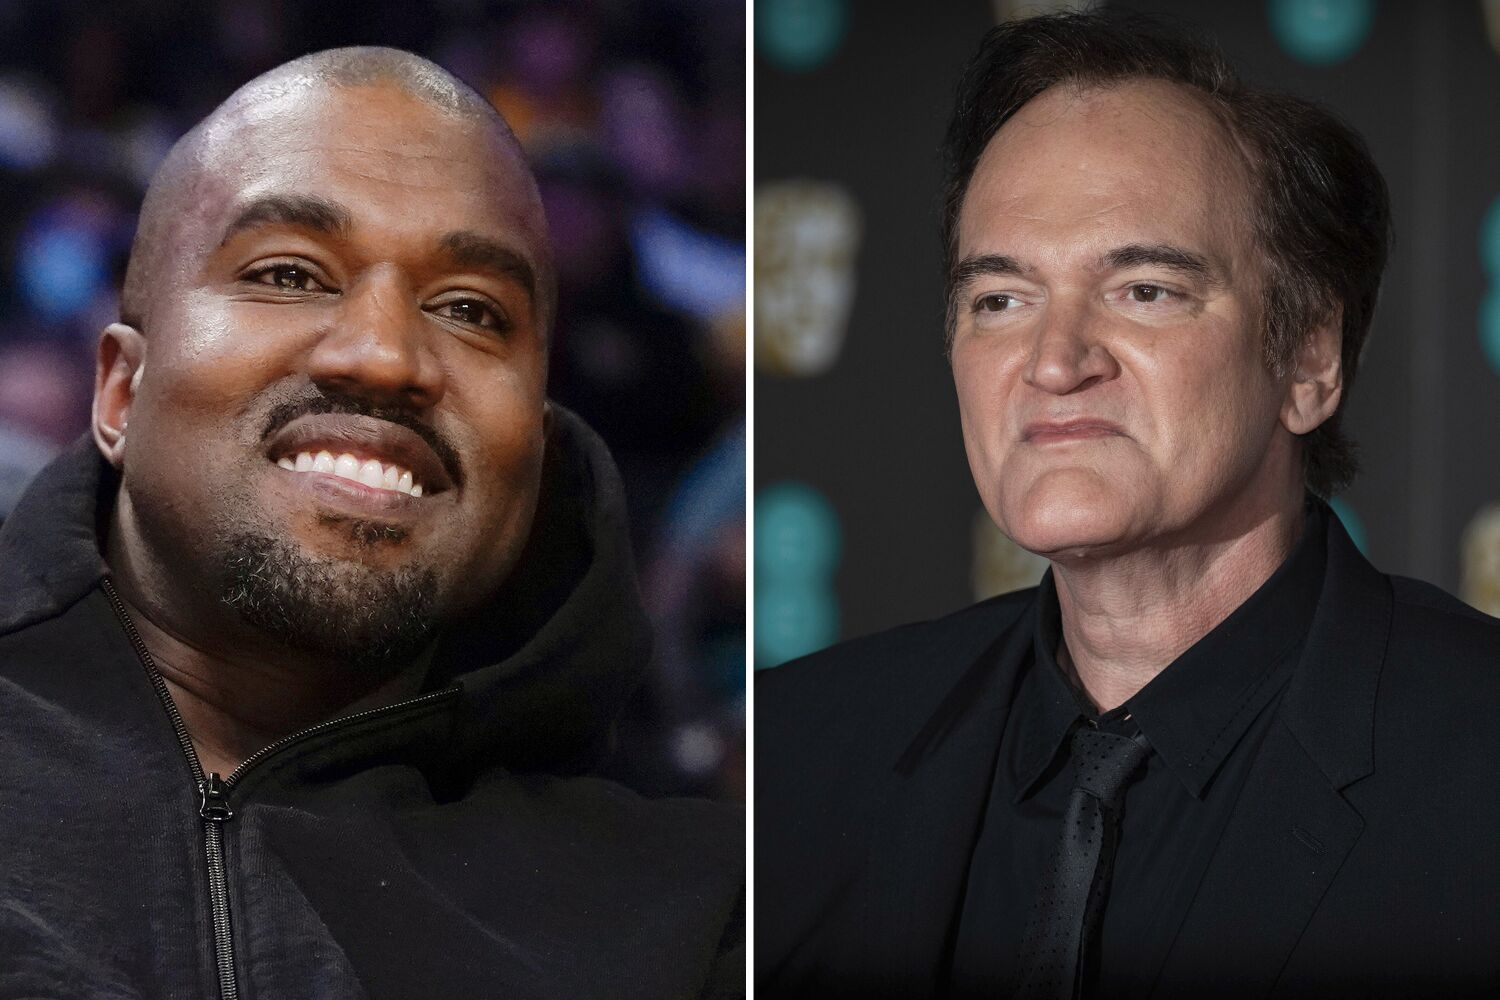 Kanye West's fallout continues, this time with Quentin Tarantino denying a claim